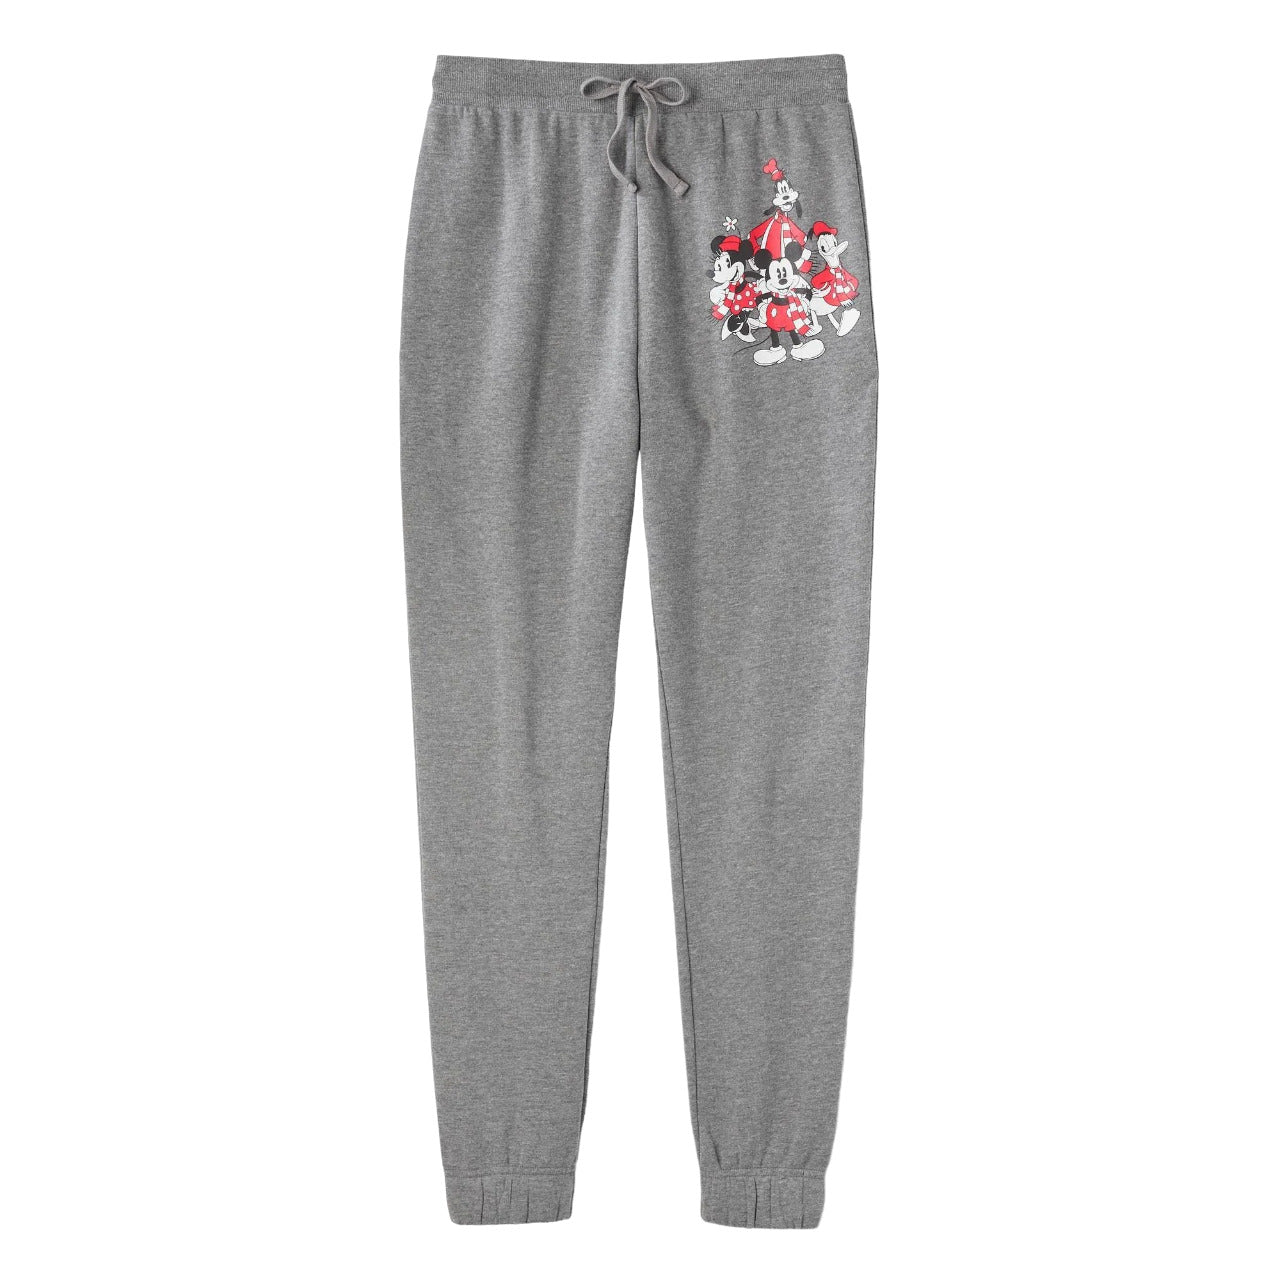 Adult Disney Mickey Mouse Graphic Jogger Pants - Charcoal Gray XS